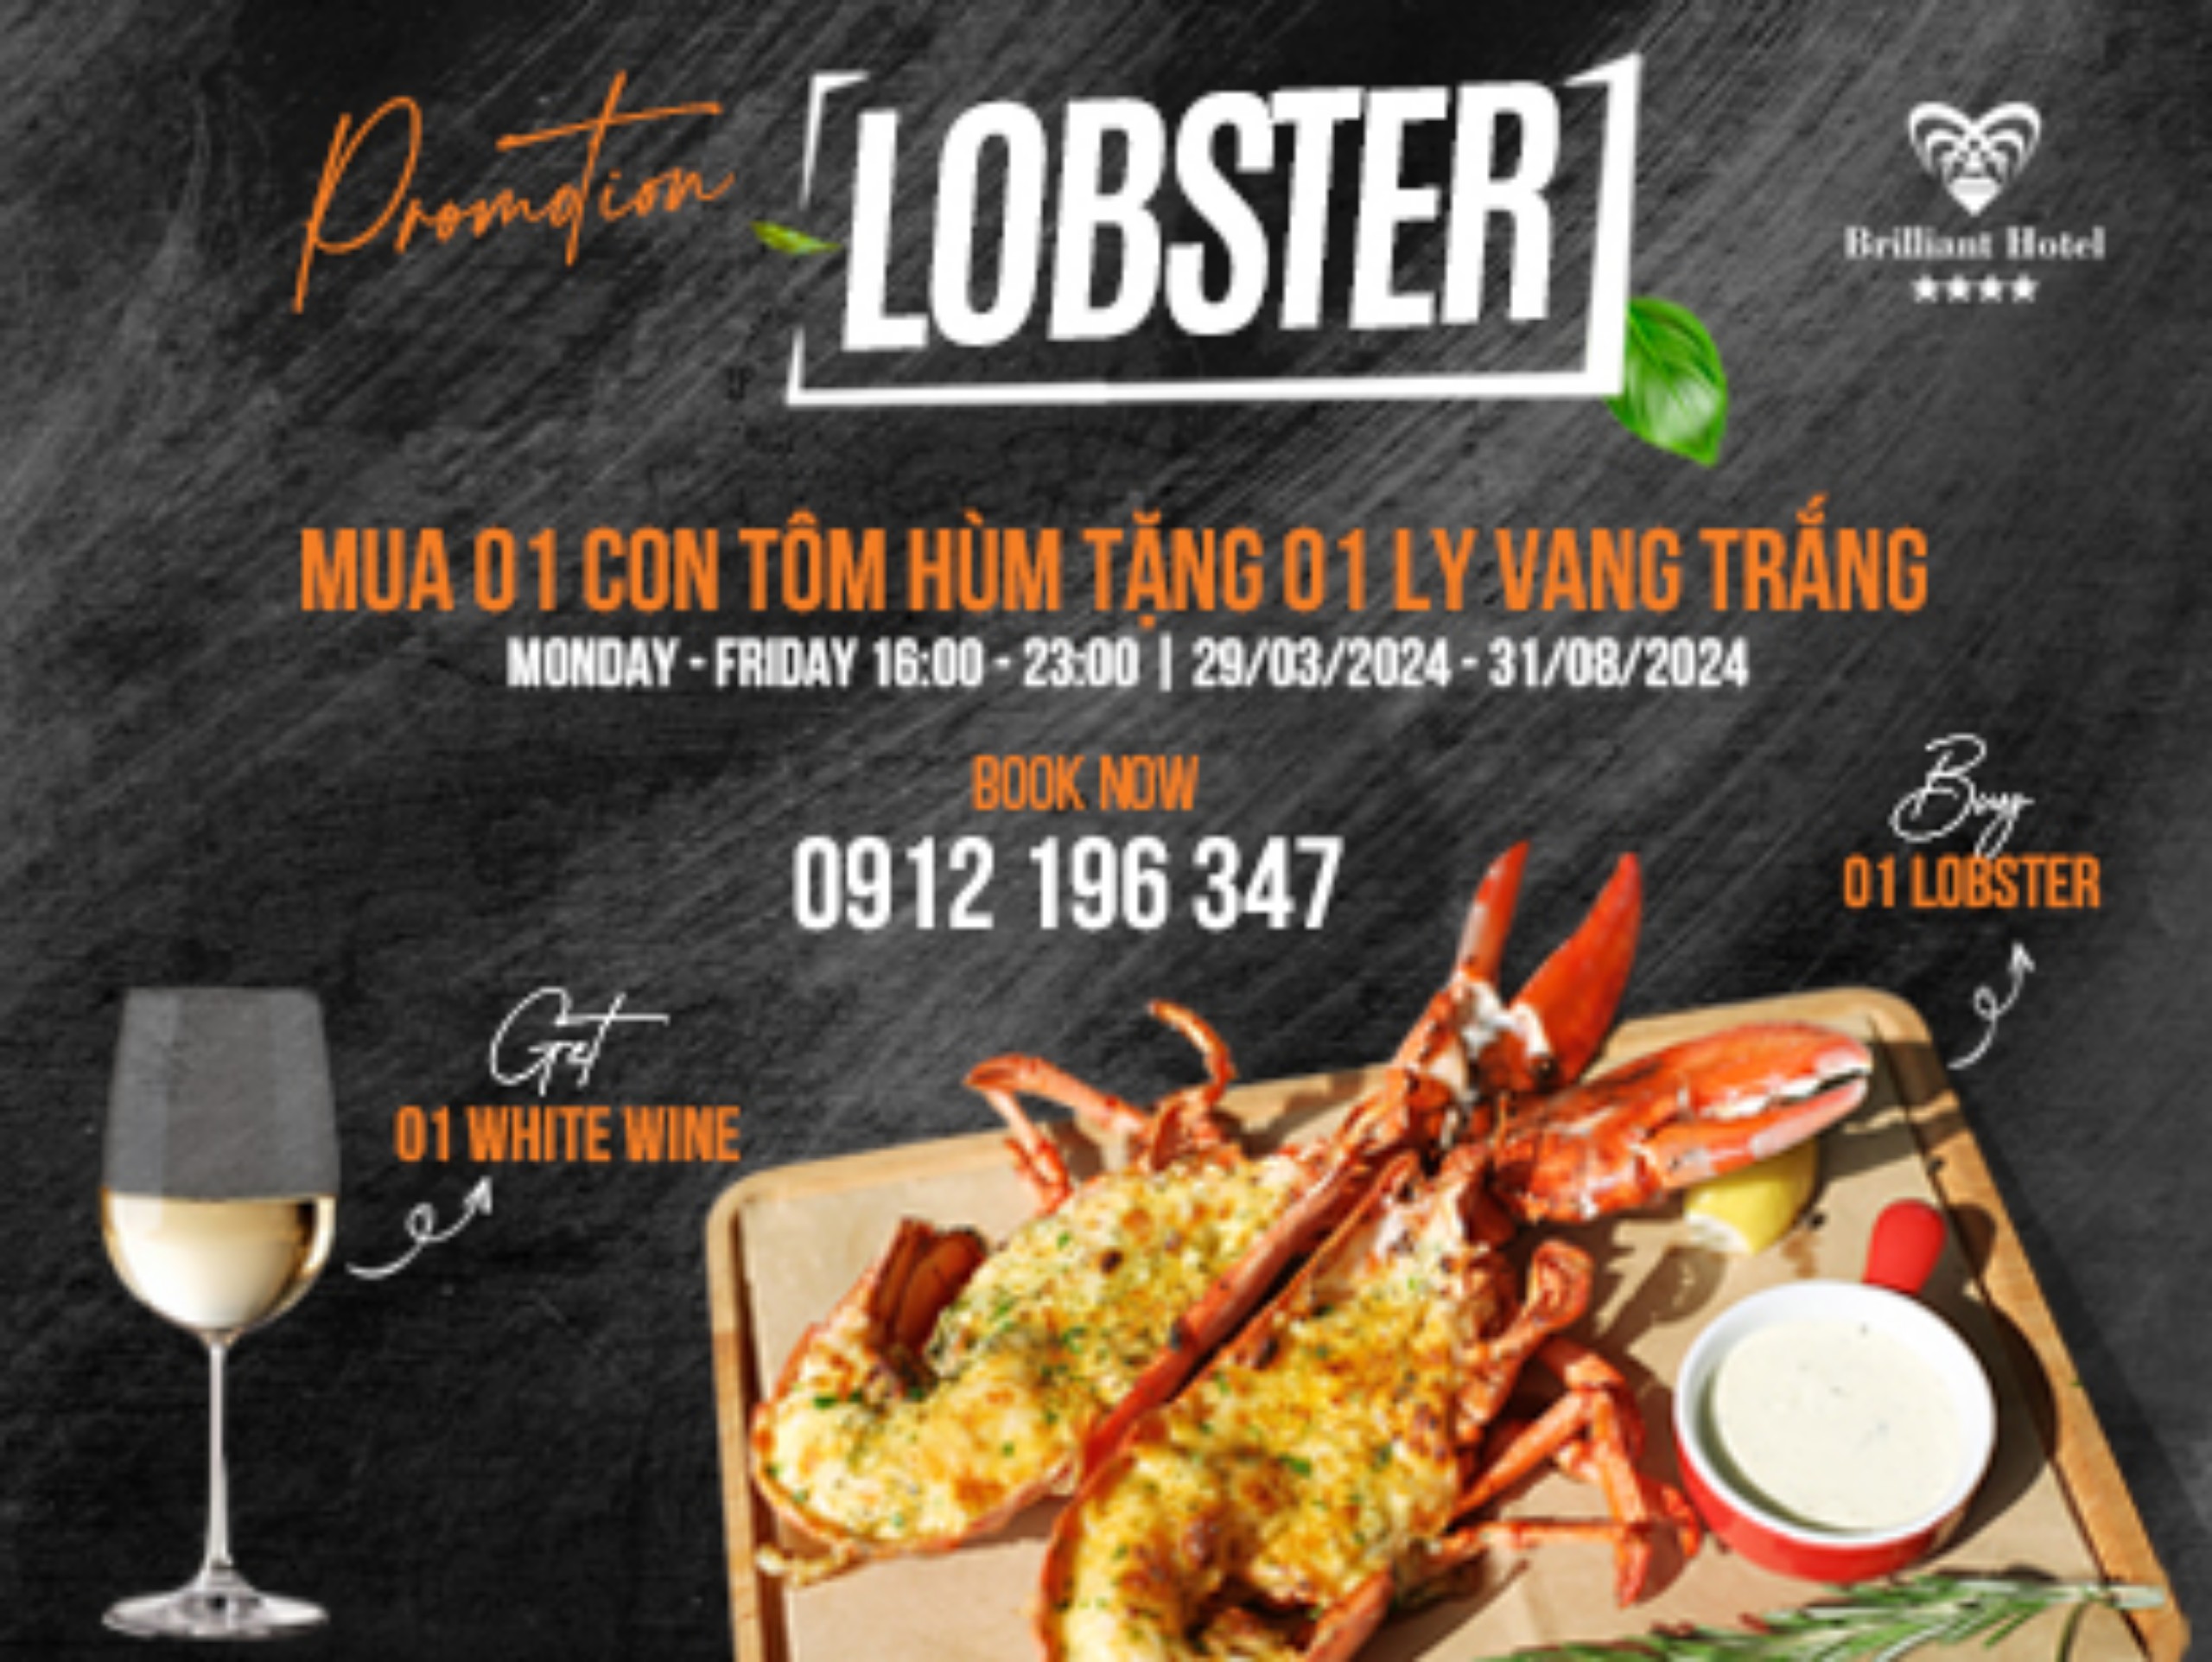 WELCOME SUMMER LOBSTER PROMOTION